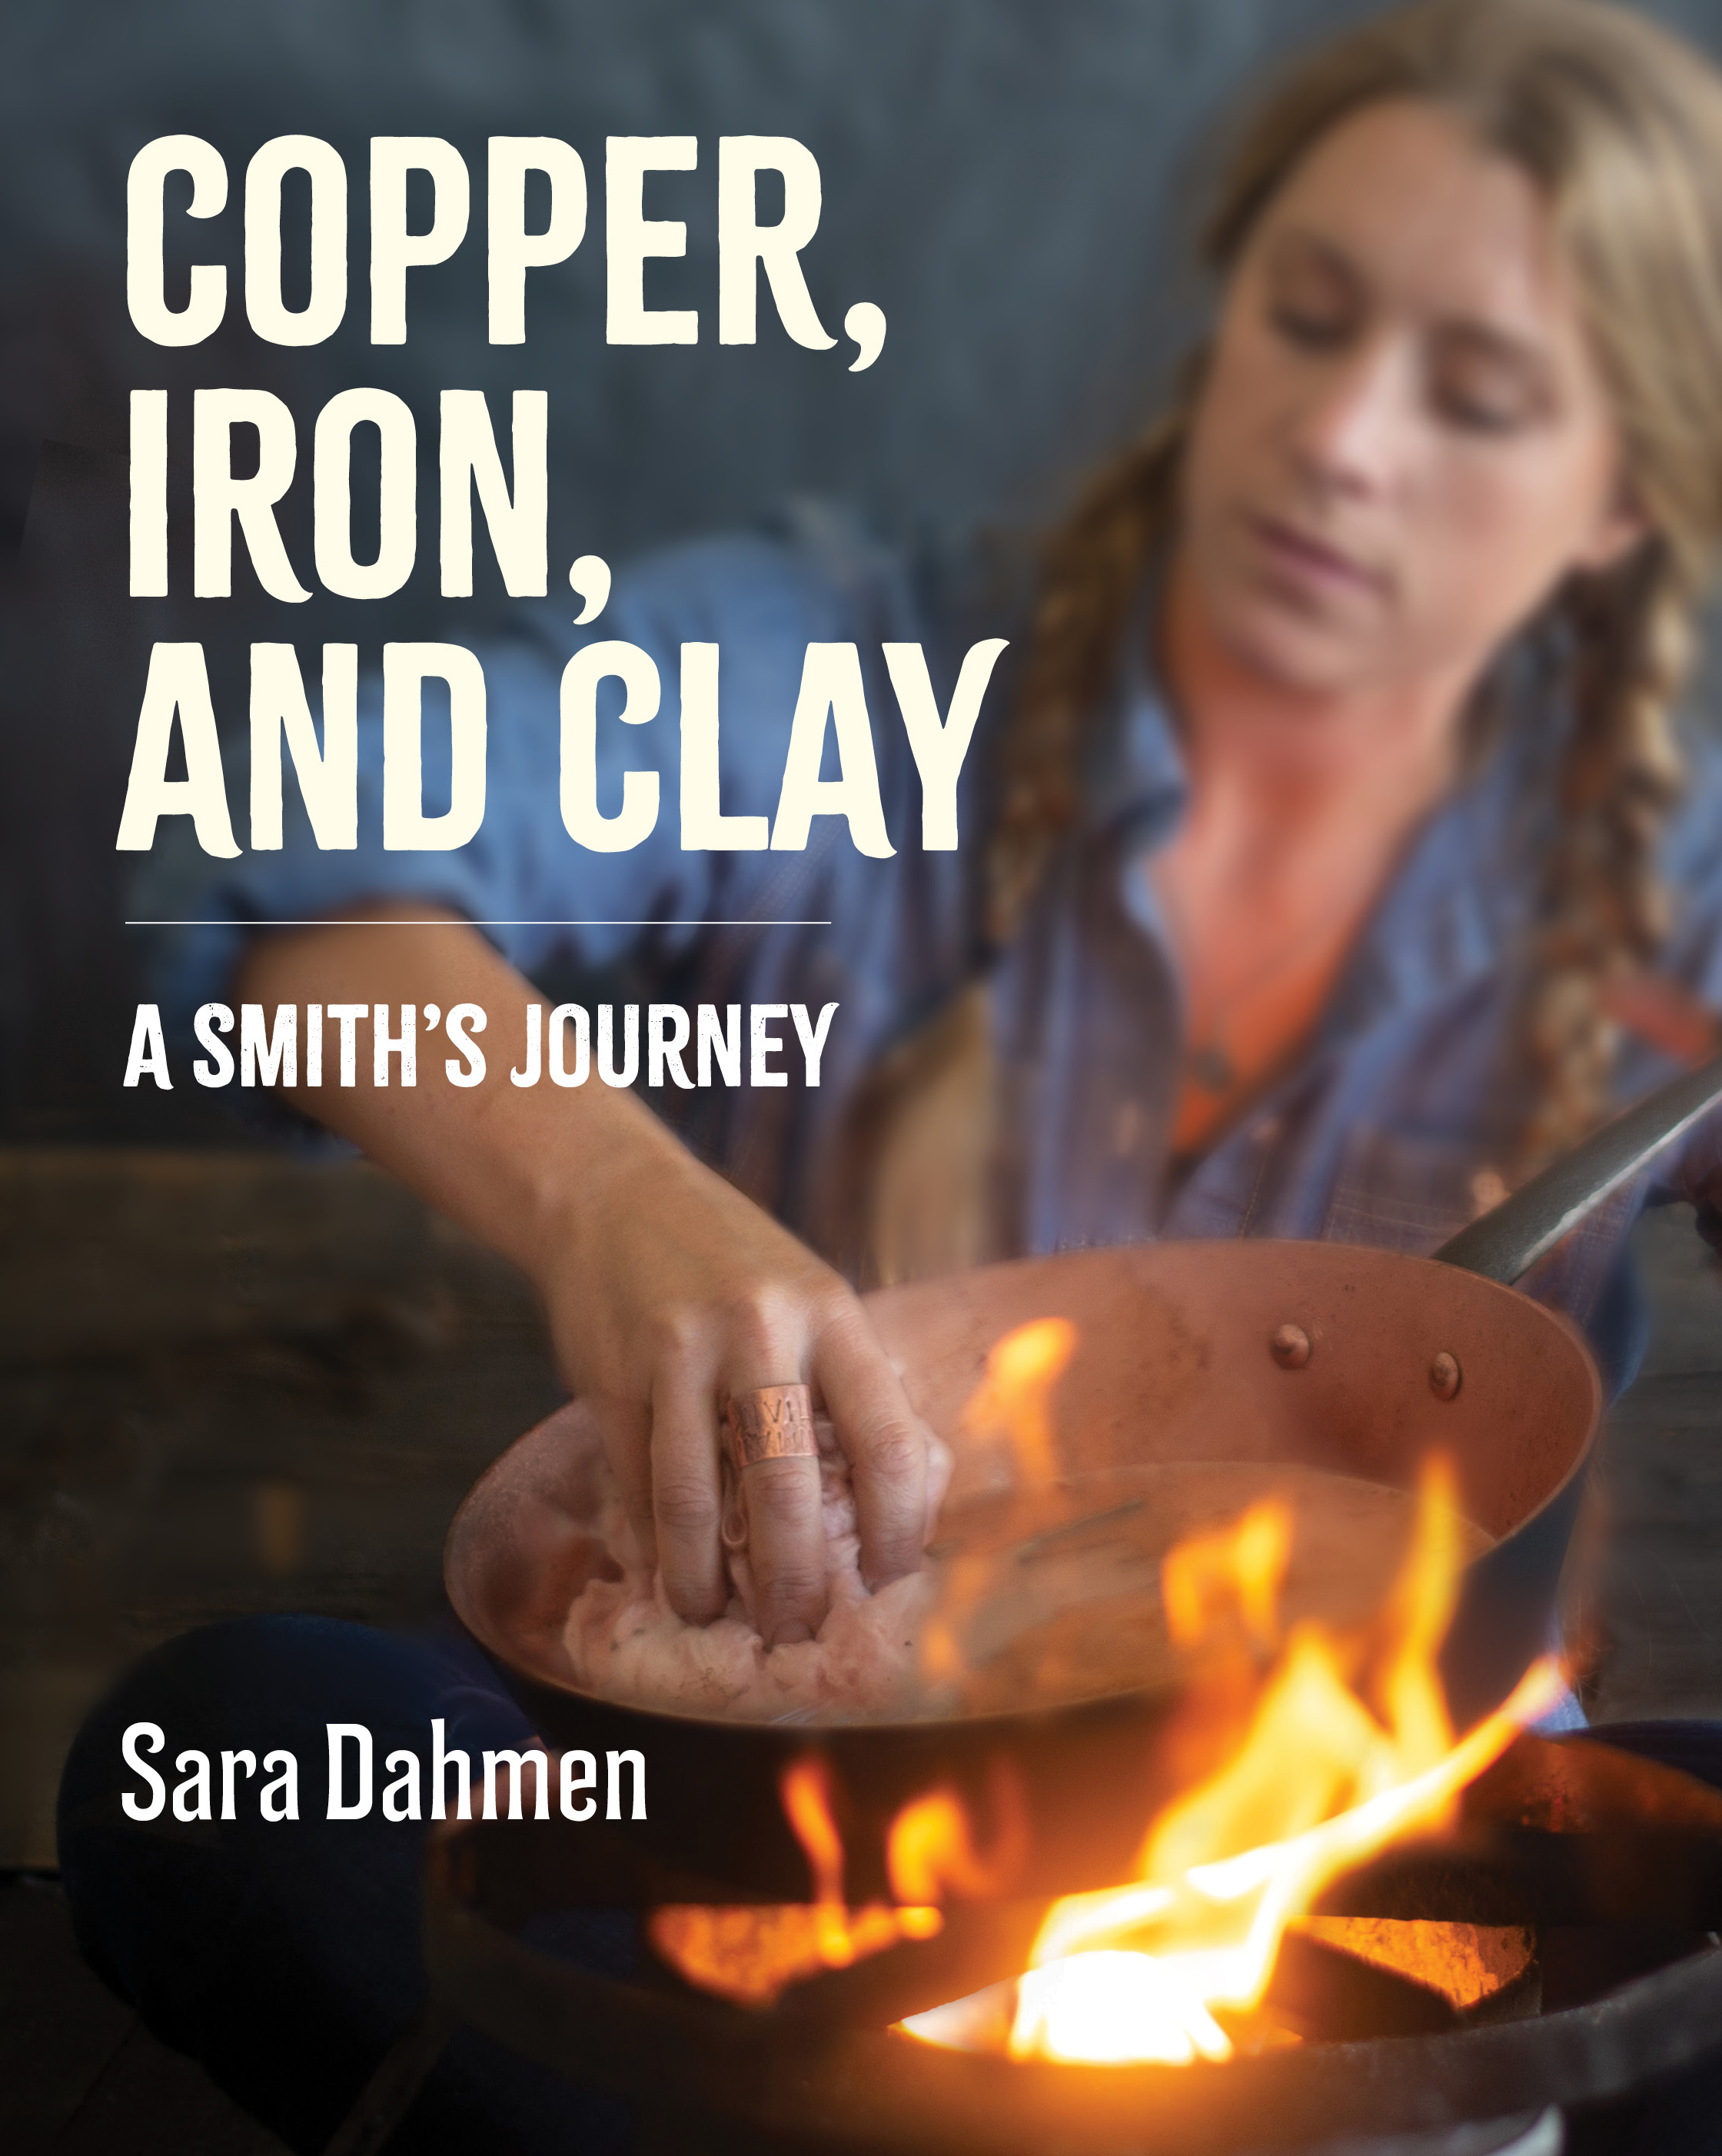 CopperIronClay